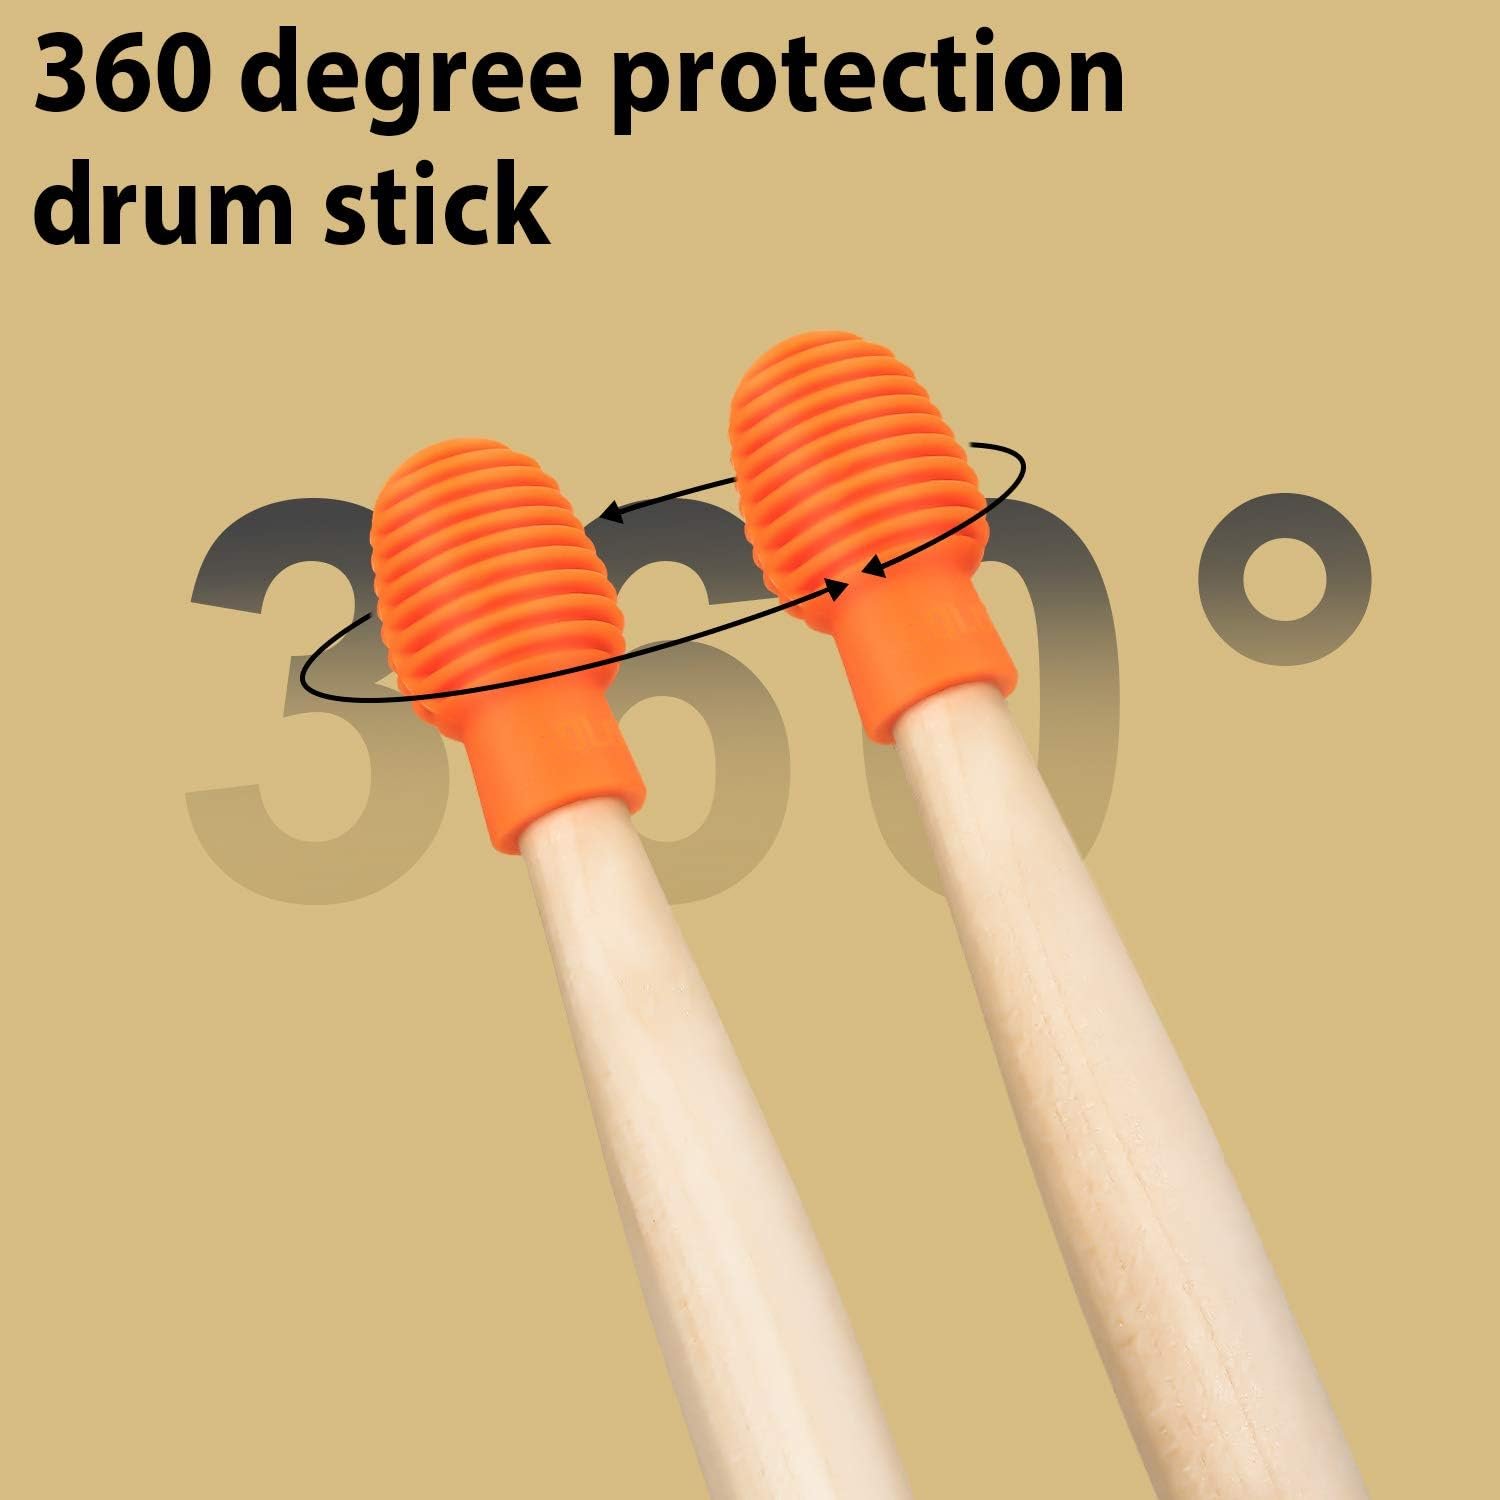 4 Pieces Drum Mute Drum Dampener Silicone Drumstick Silent Practice Tips Percussion Accessory Mute Replacement Musical Instruments Accessory (Orange, Grey,Grid)